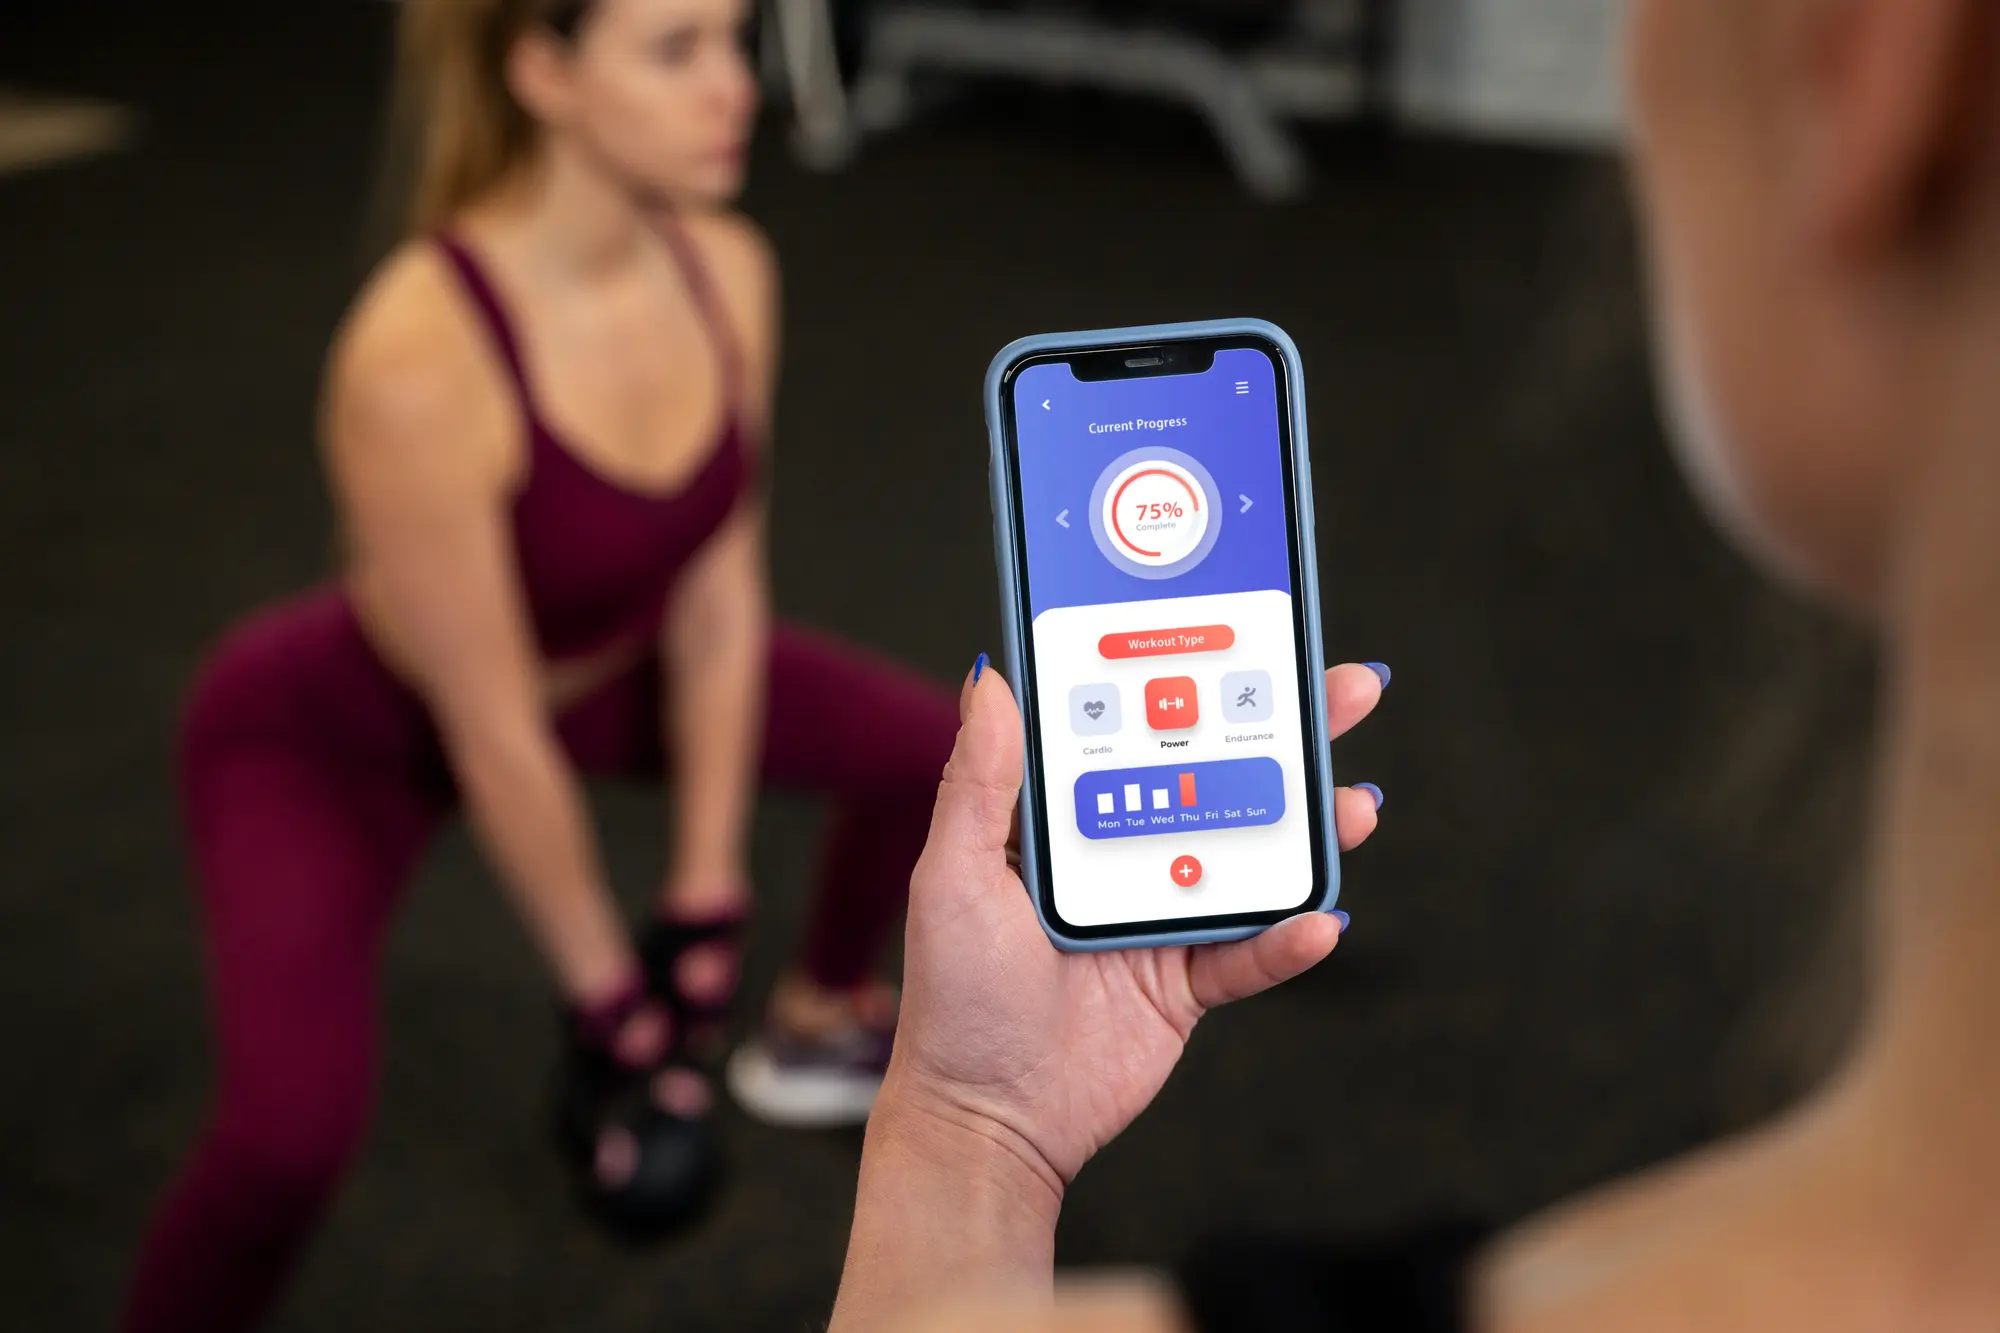 AI Personal trainer in mobile health paltforms is the next big thing